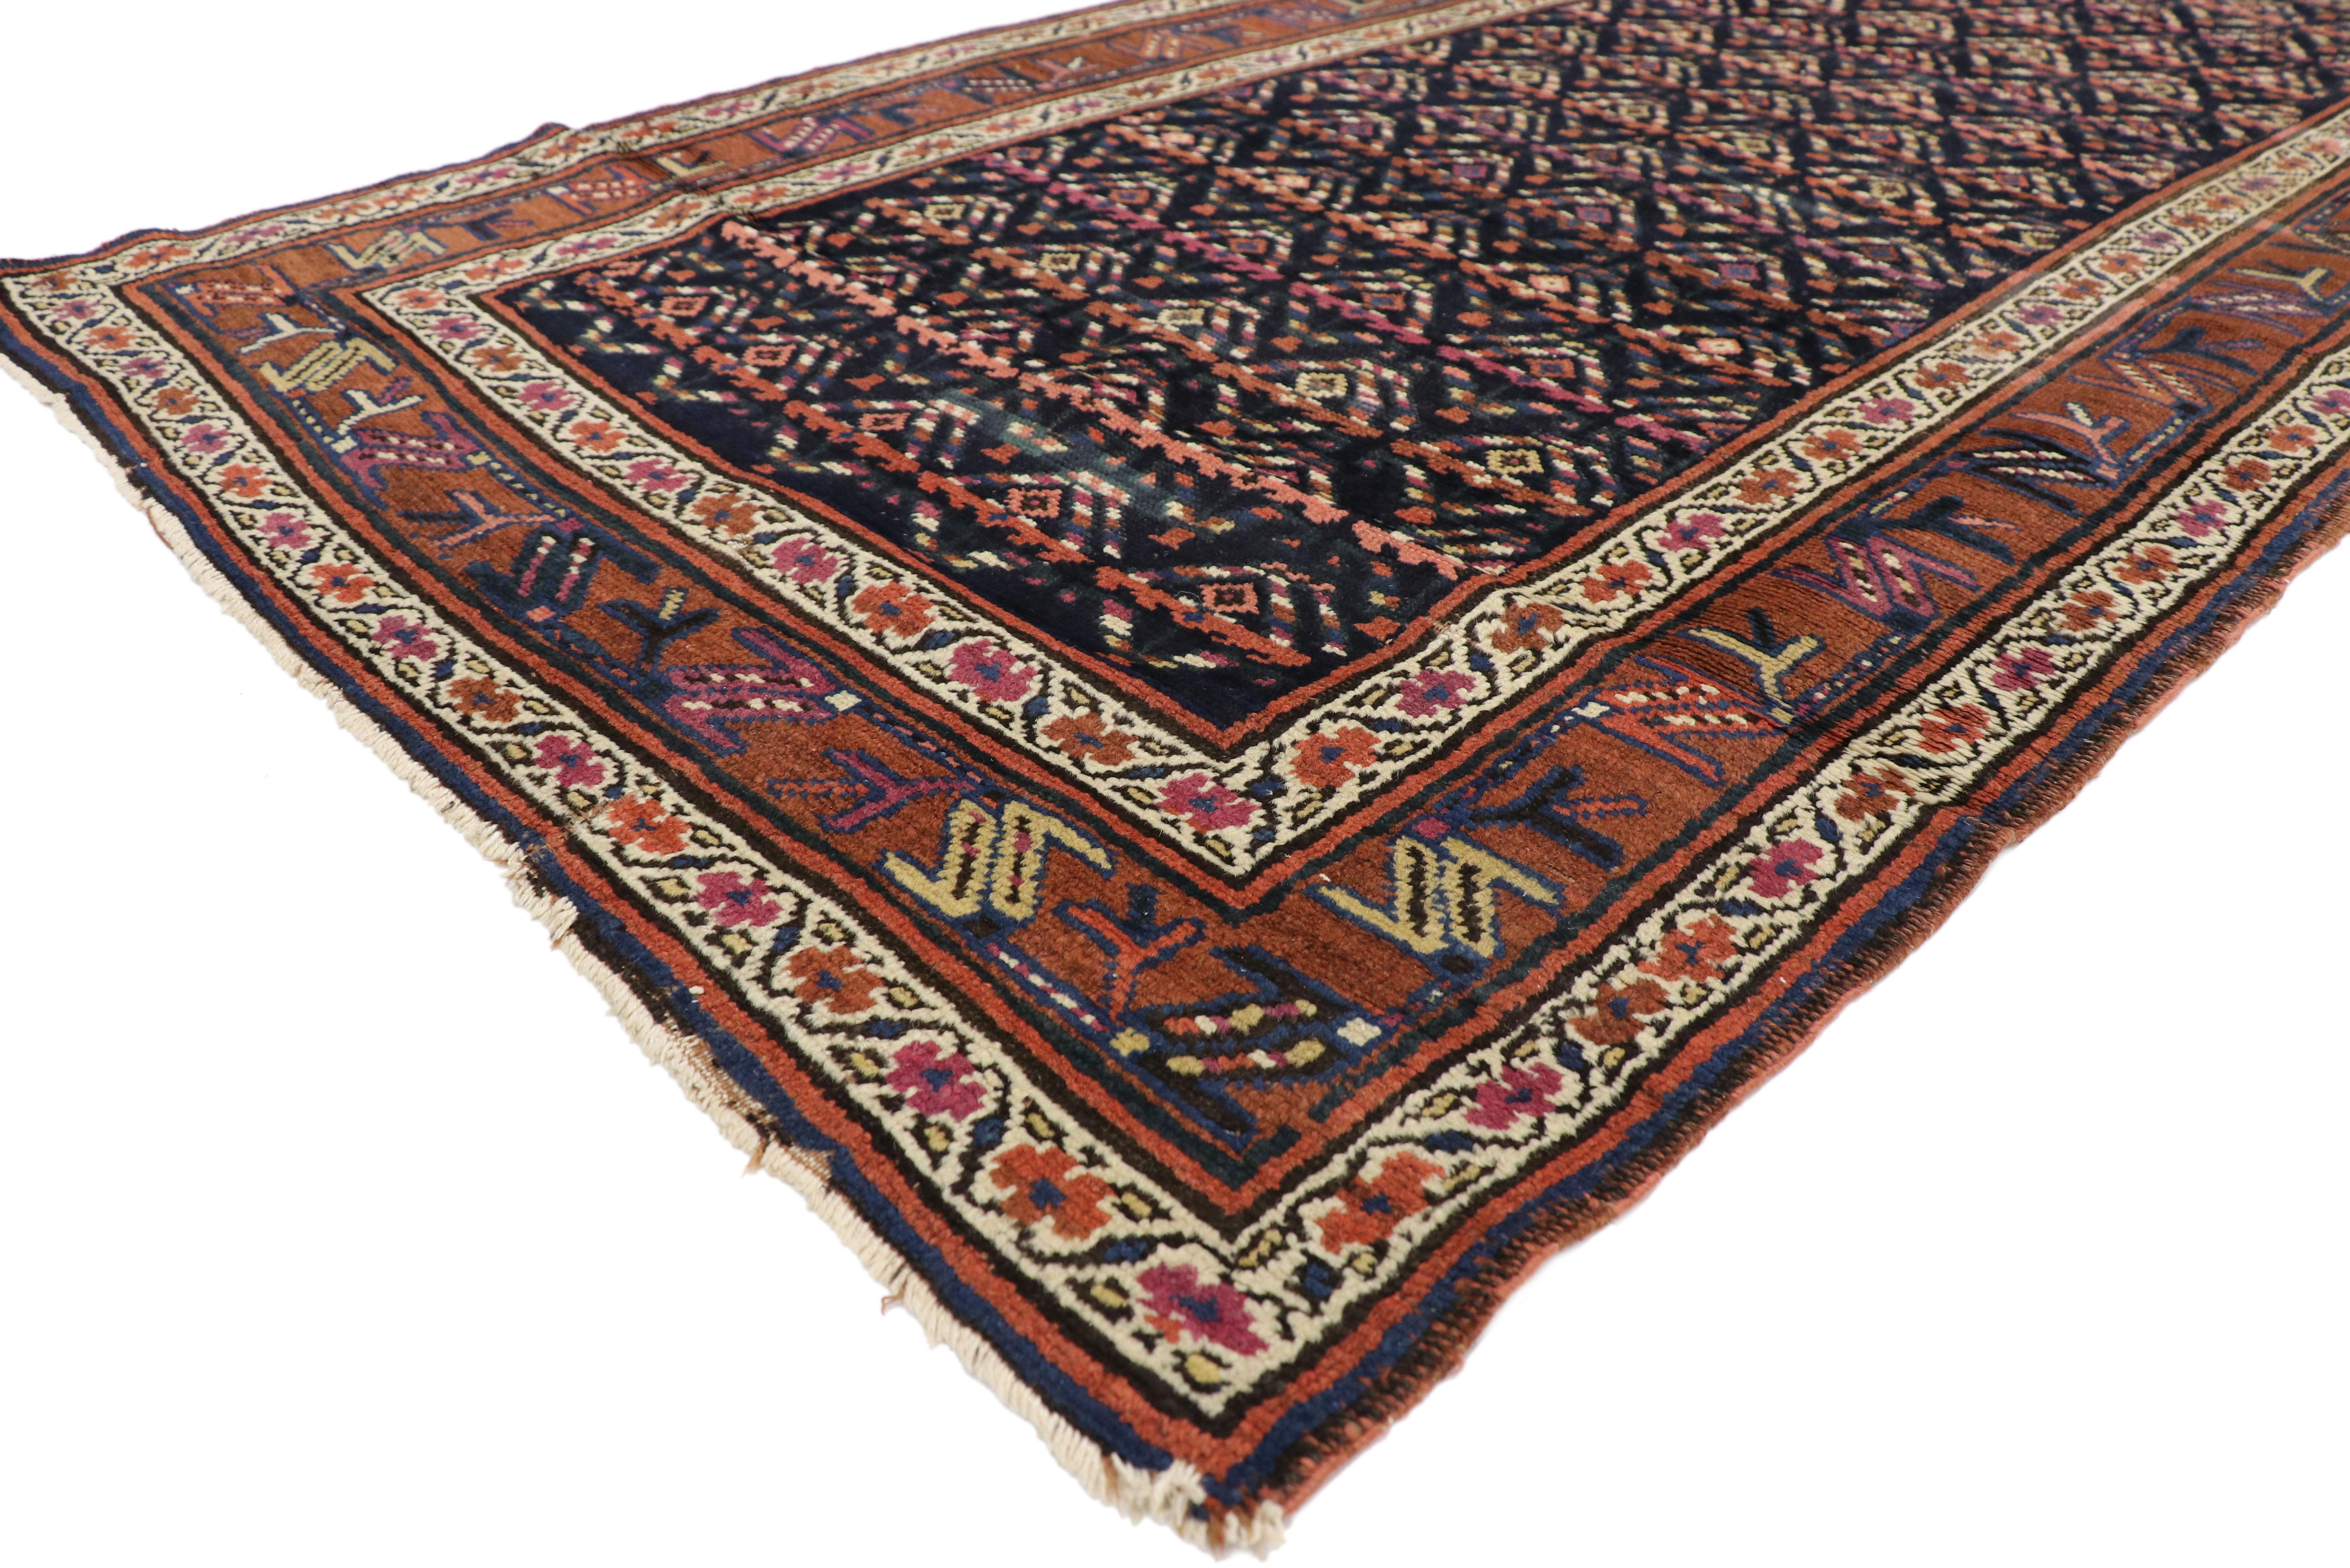 70541 Antique Caucasian Boteh Shirvan Hallway Runner with Modern Victorian Style 03'07 x 13'02. This hand-knotted wool antique Caucasian Shirvan hallway runner features all over repeating geometric boteh motifs. The boteh resembles sprouting seed